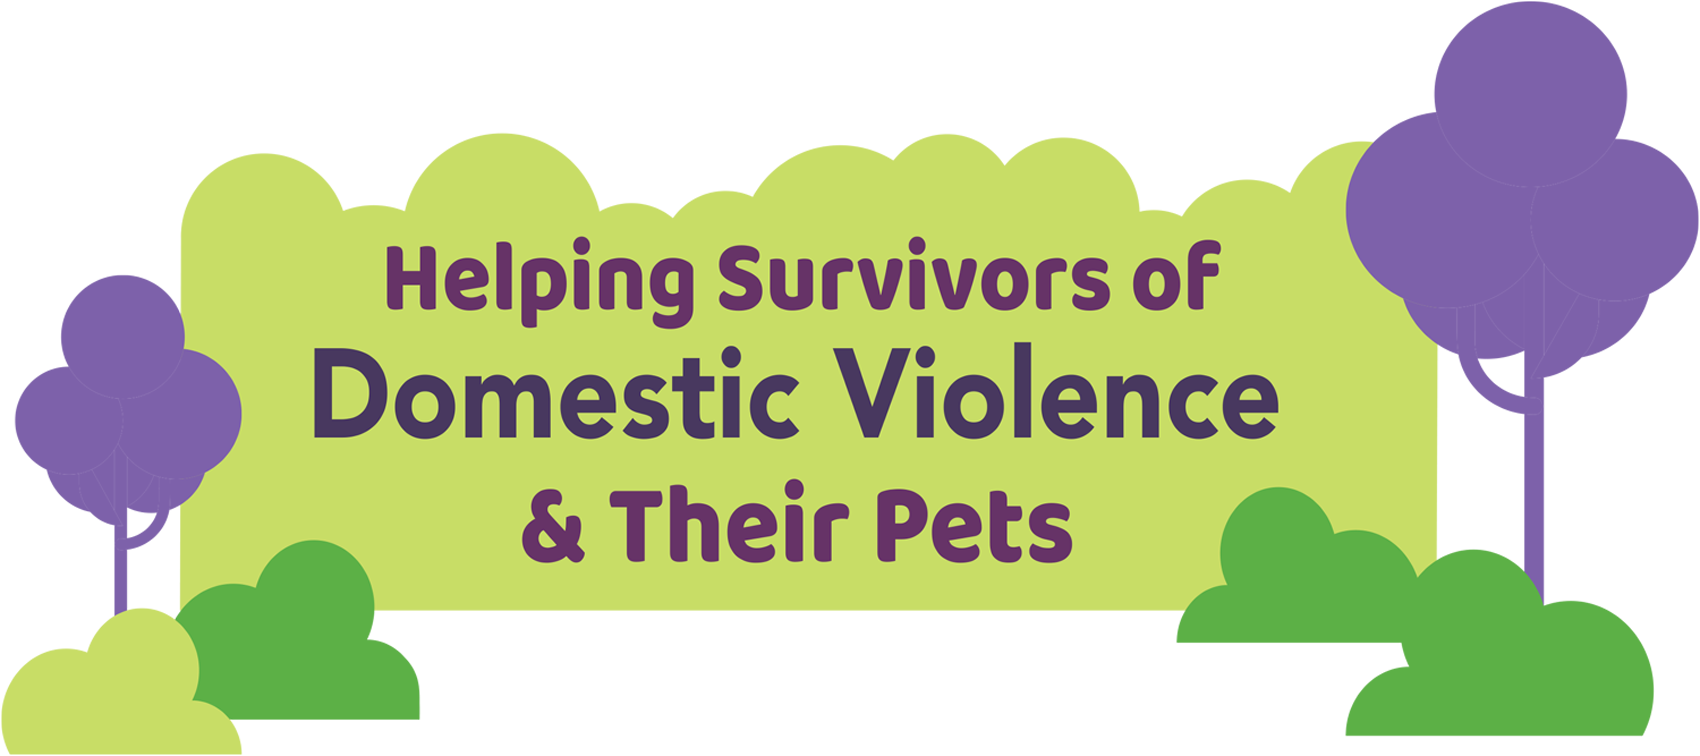 Helping Survivors of Domestic Violence & Their Pets typography with purple and green tree and bush graphics